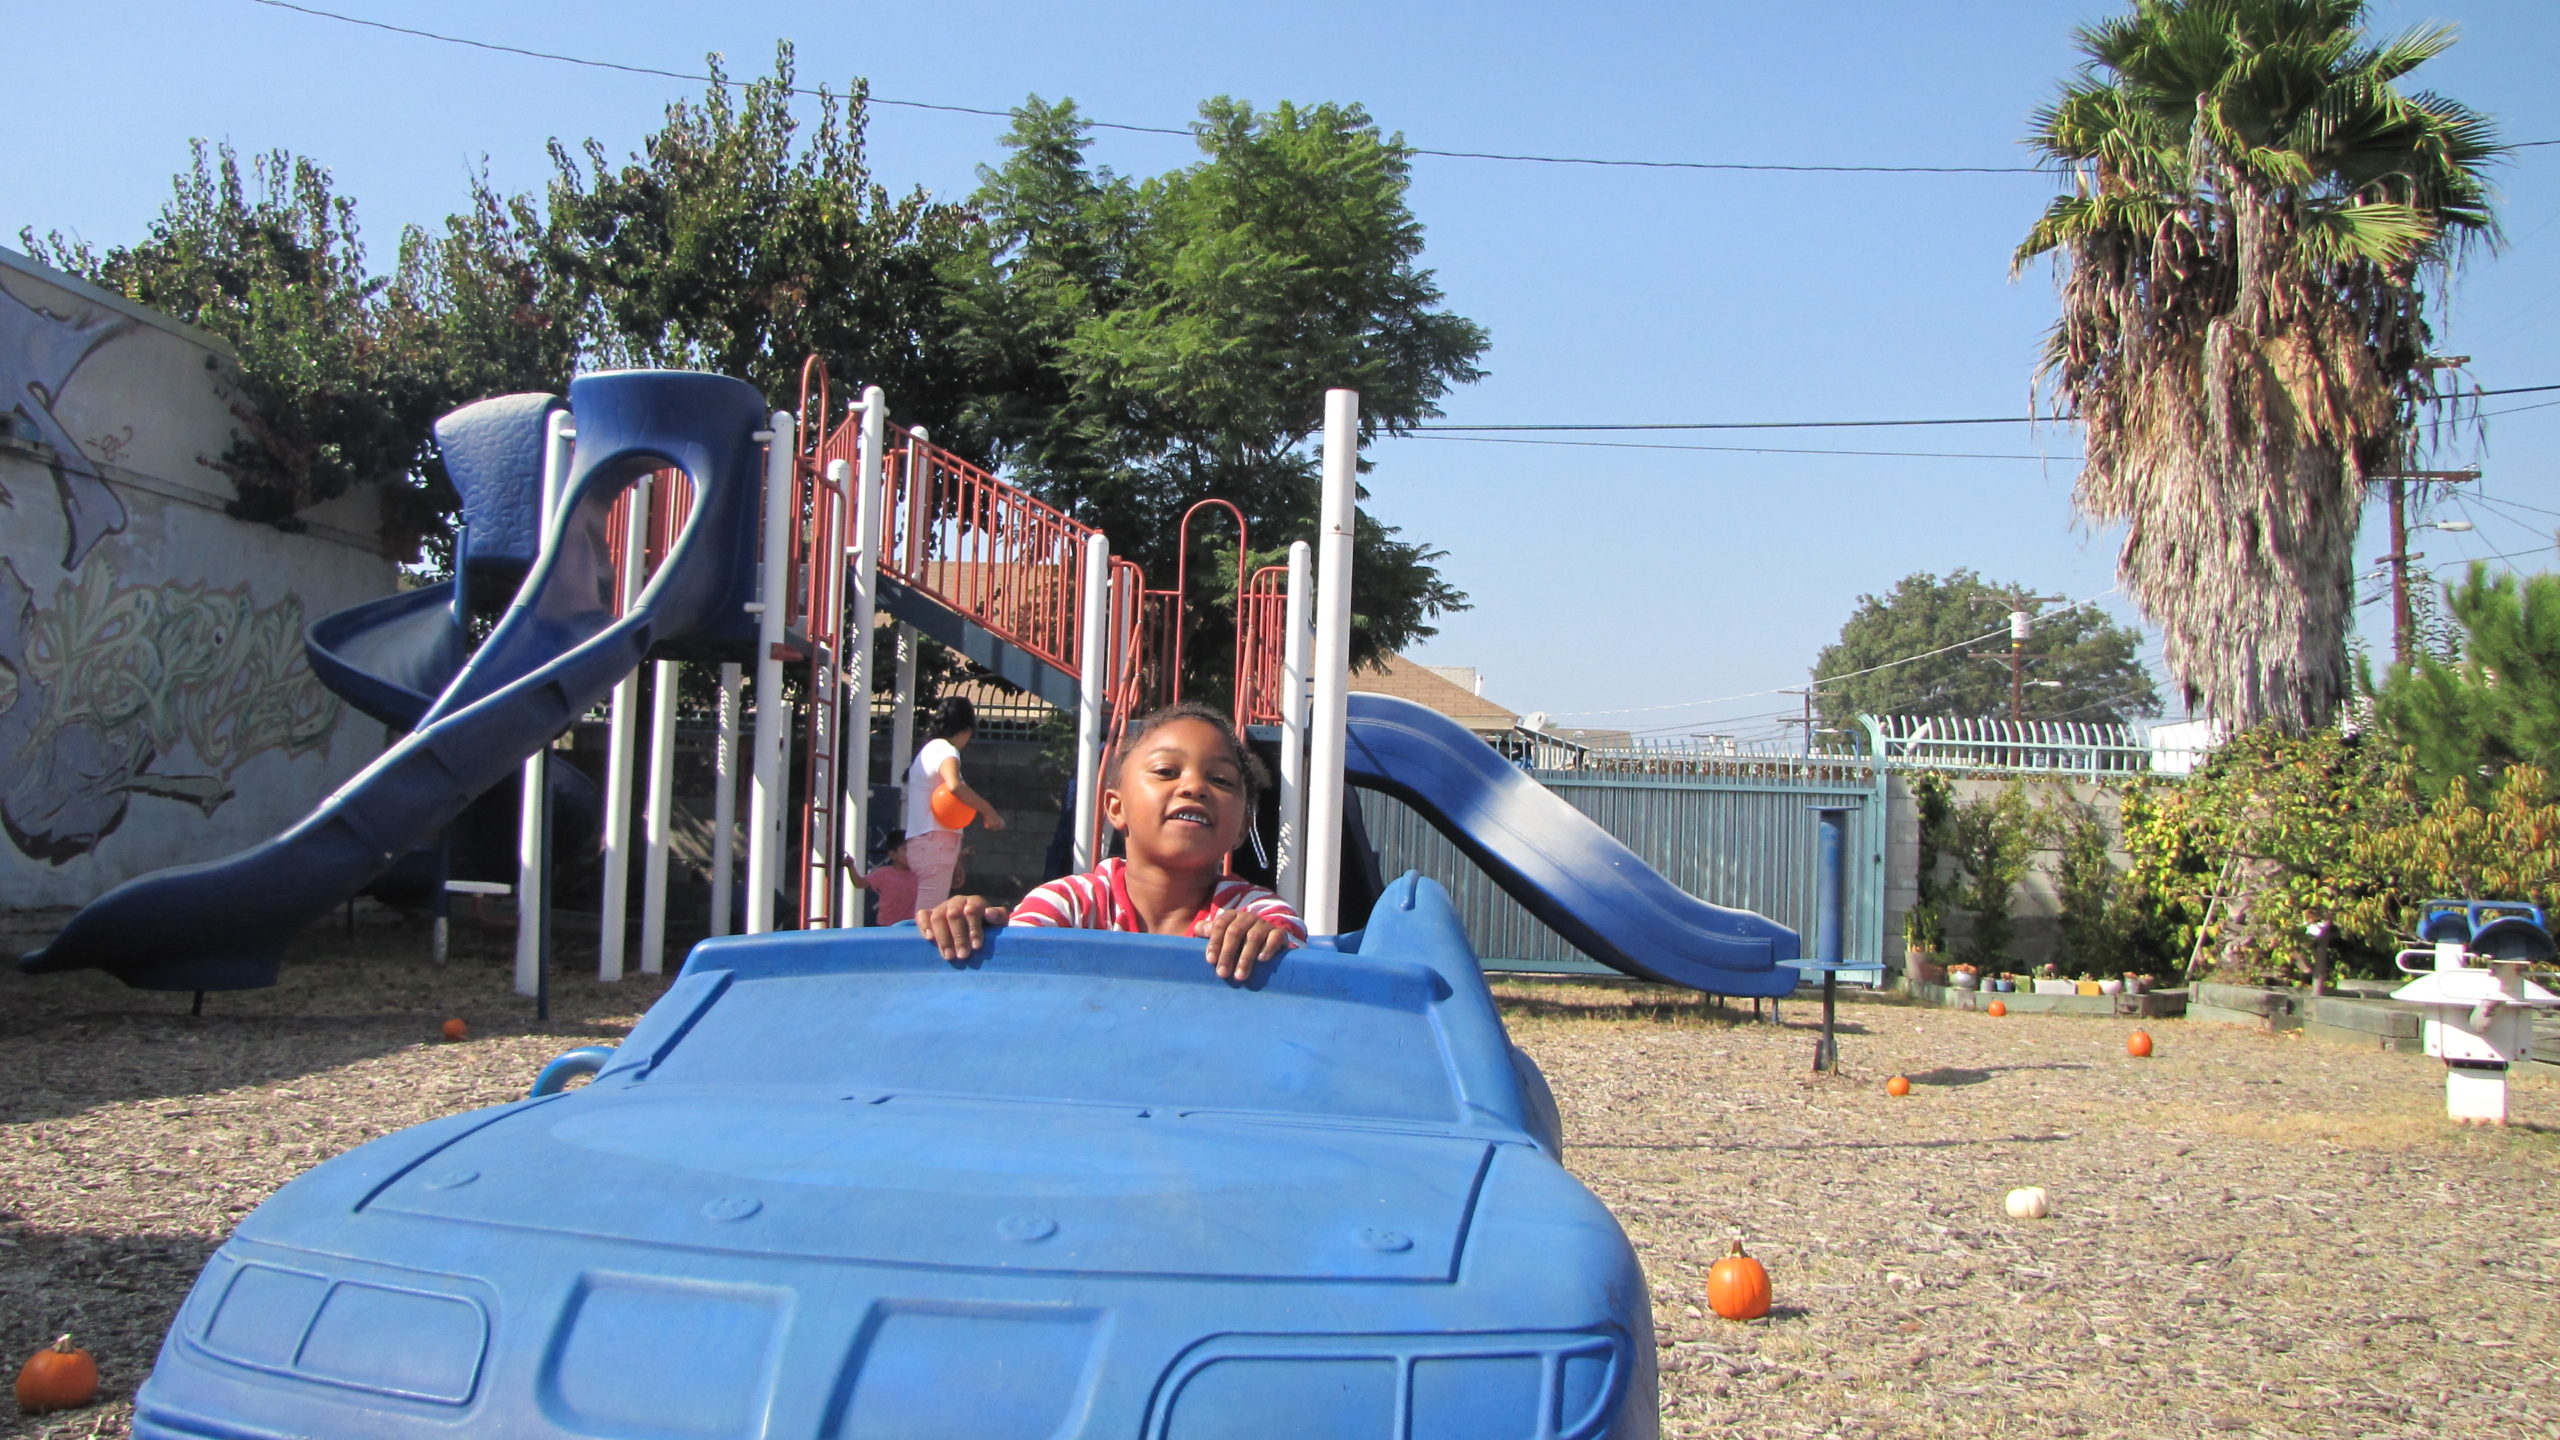 Child in a blue bar at a playground.